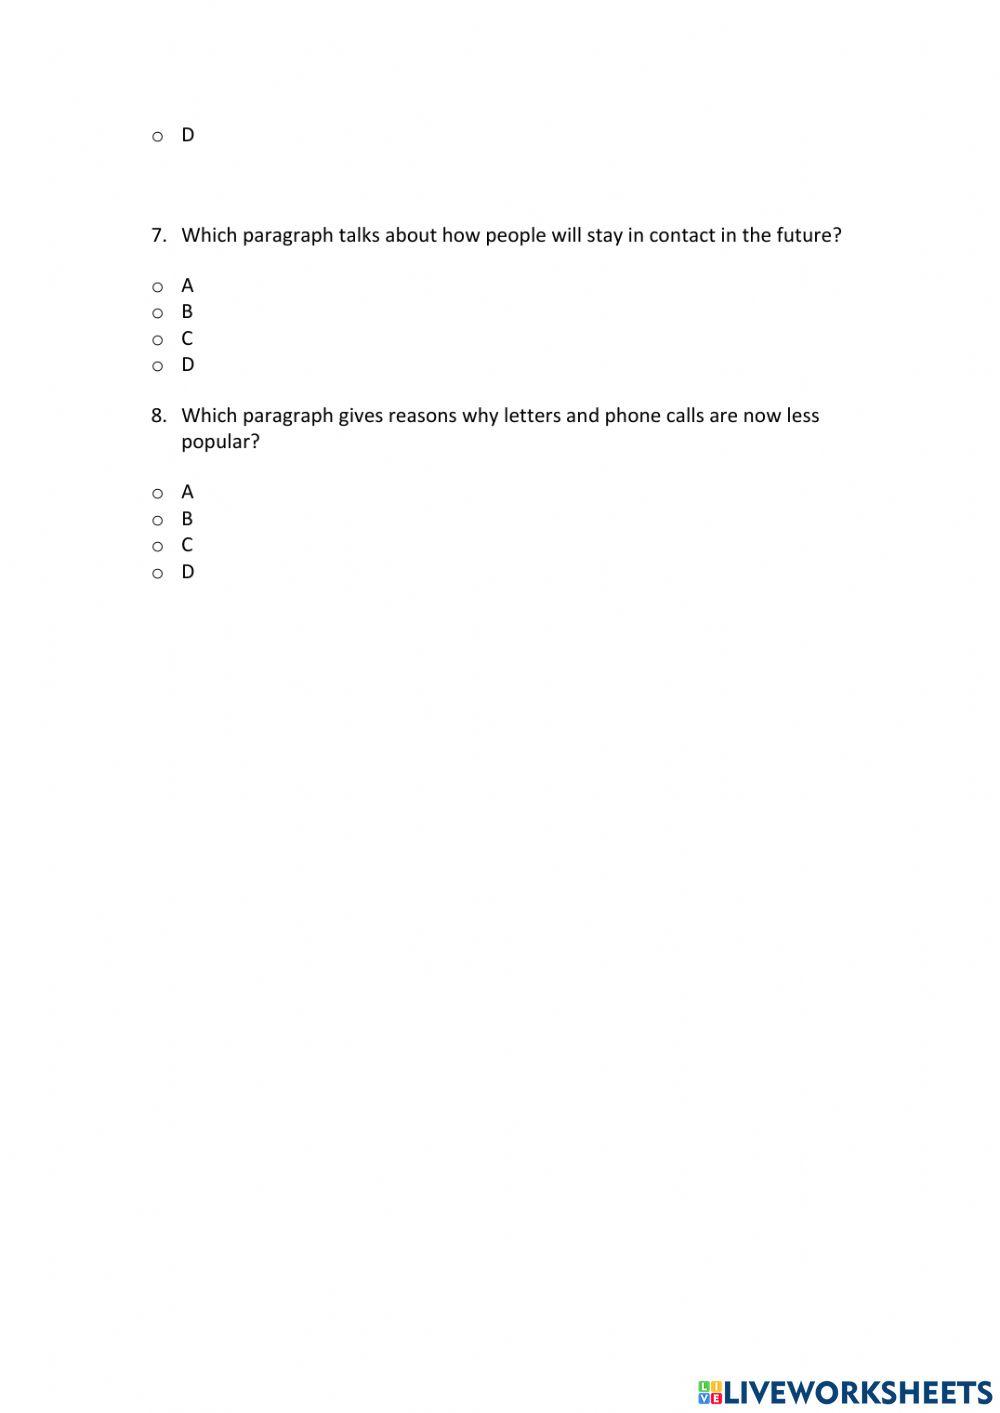 IE0, Unit 10, Reading and Writing, Exercise 5